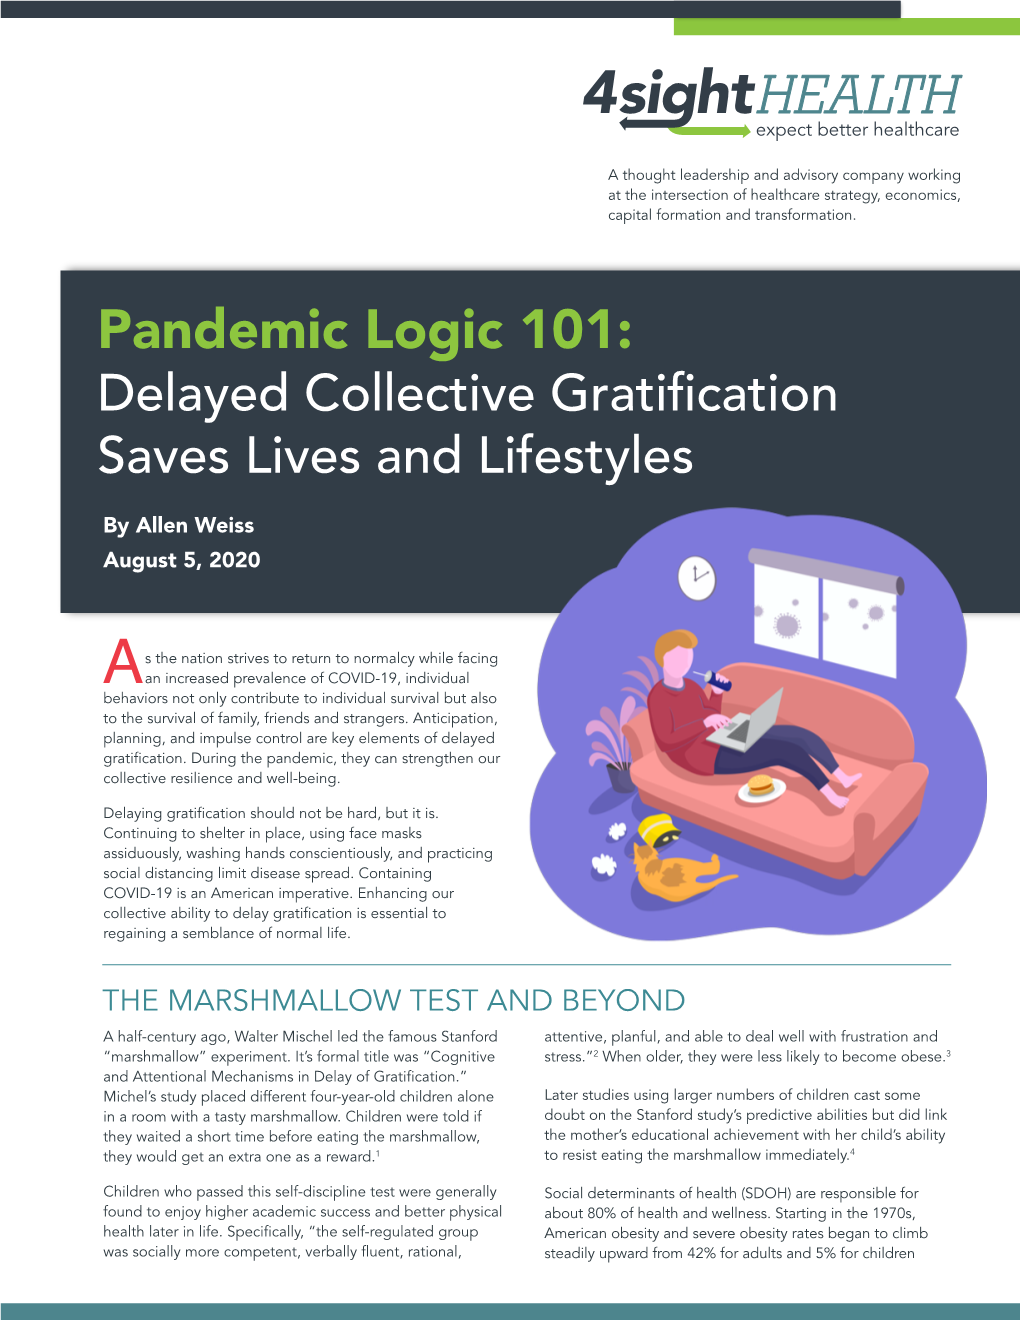 Pandemic Logic 101: Delayed Collective Gratification Saves Lives and Lifestyles